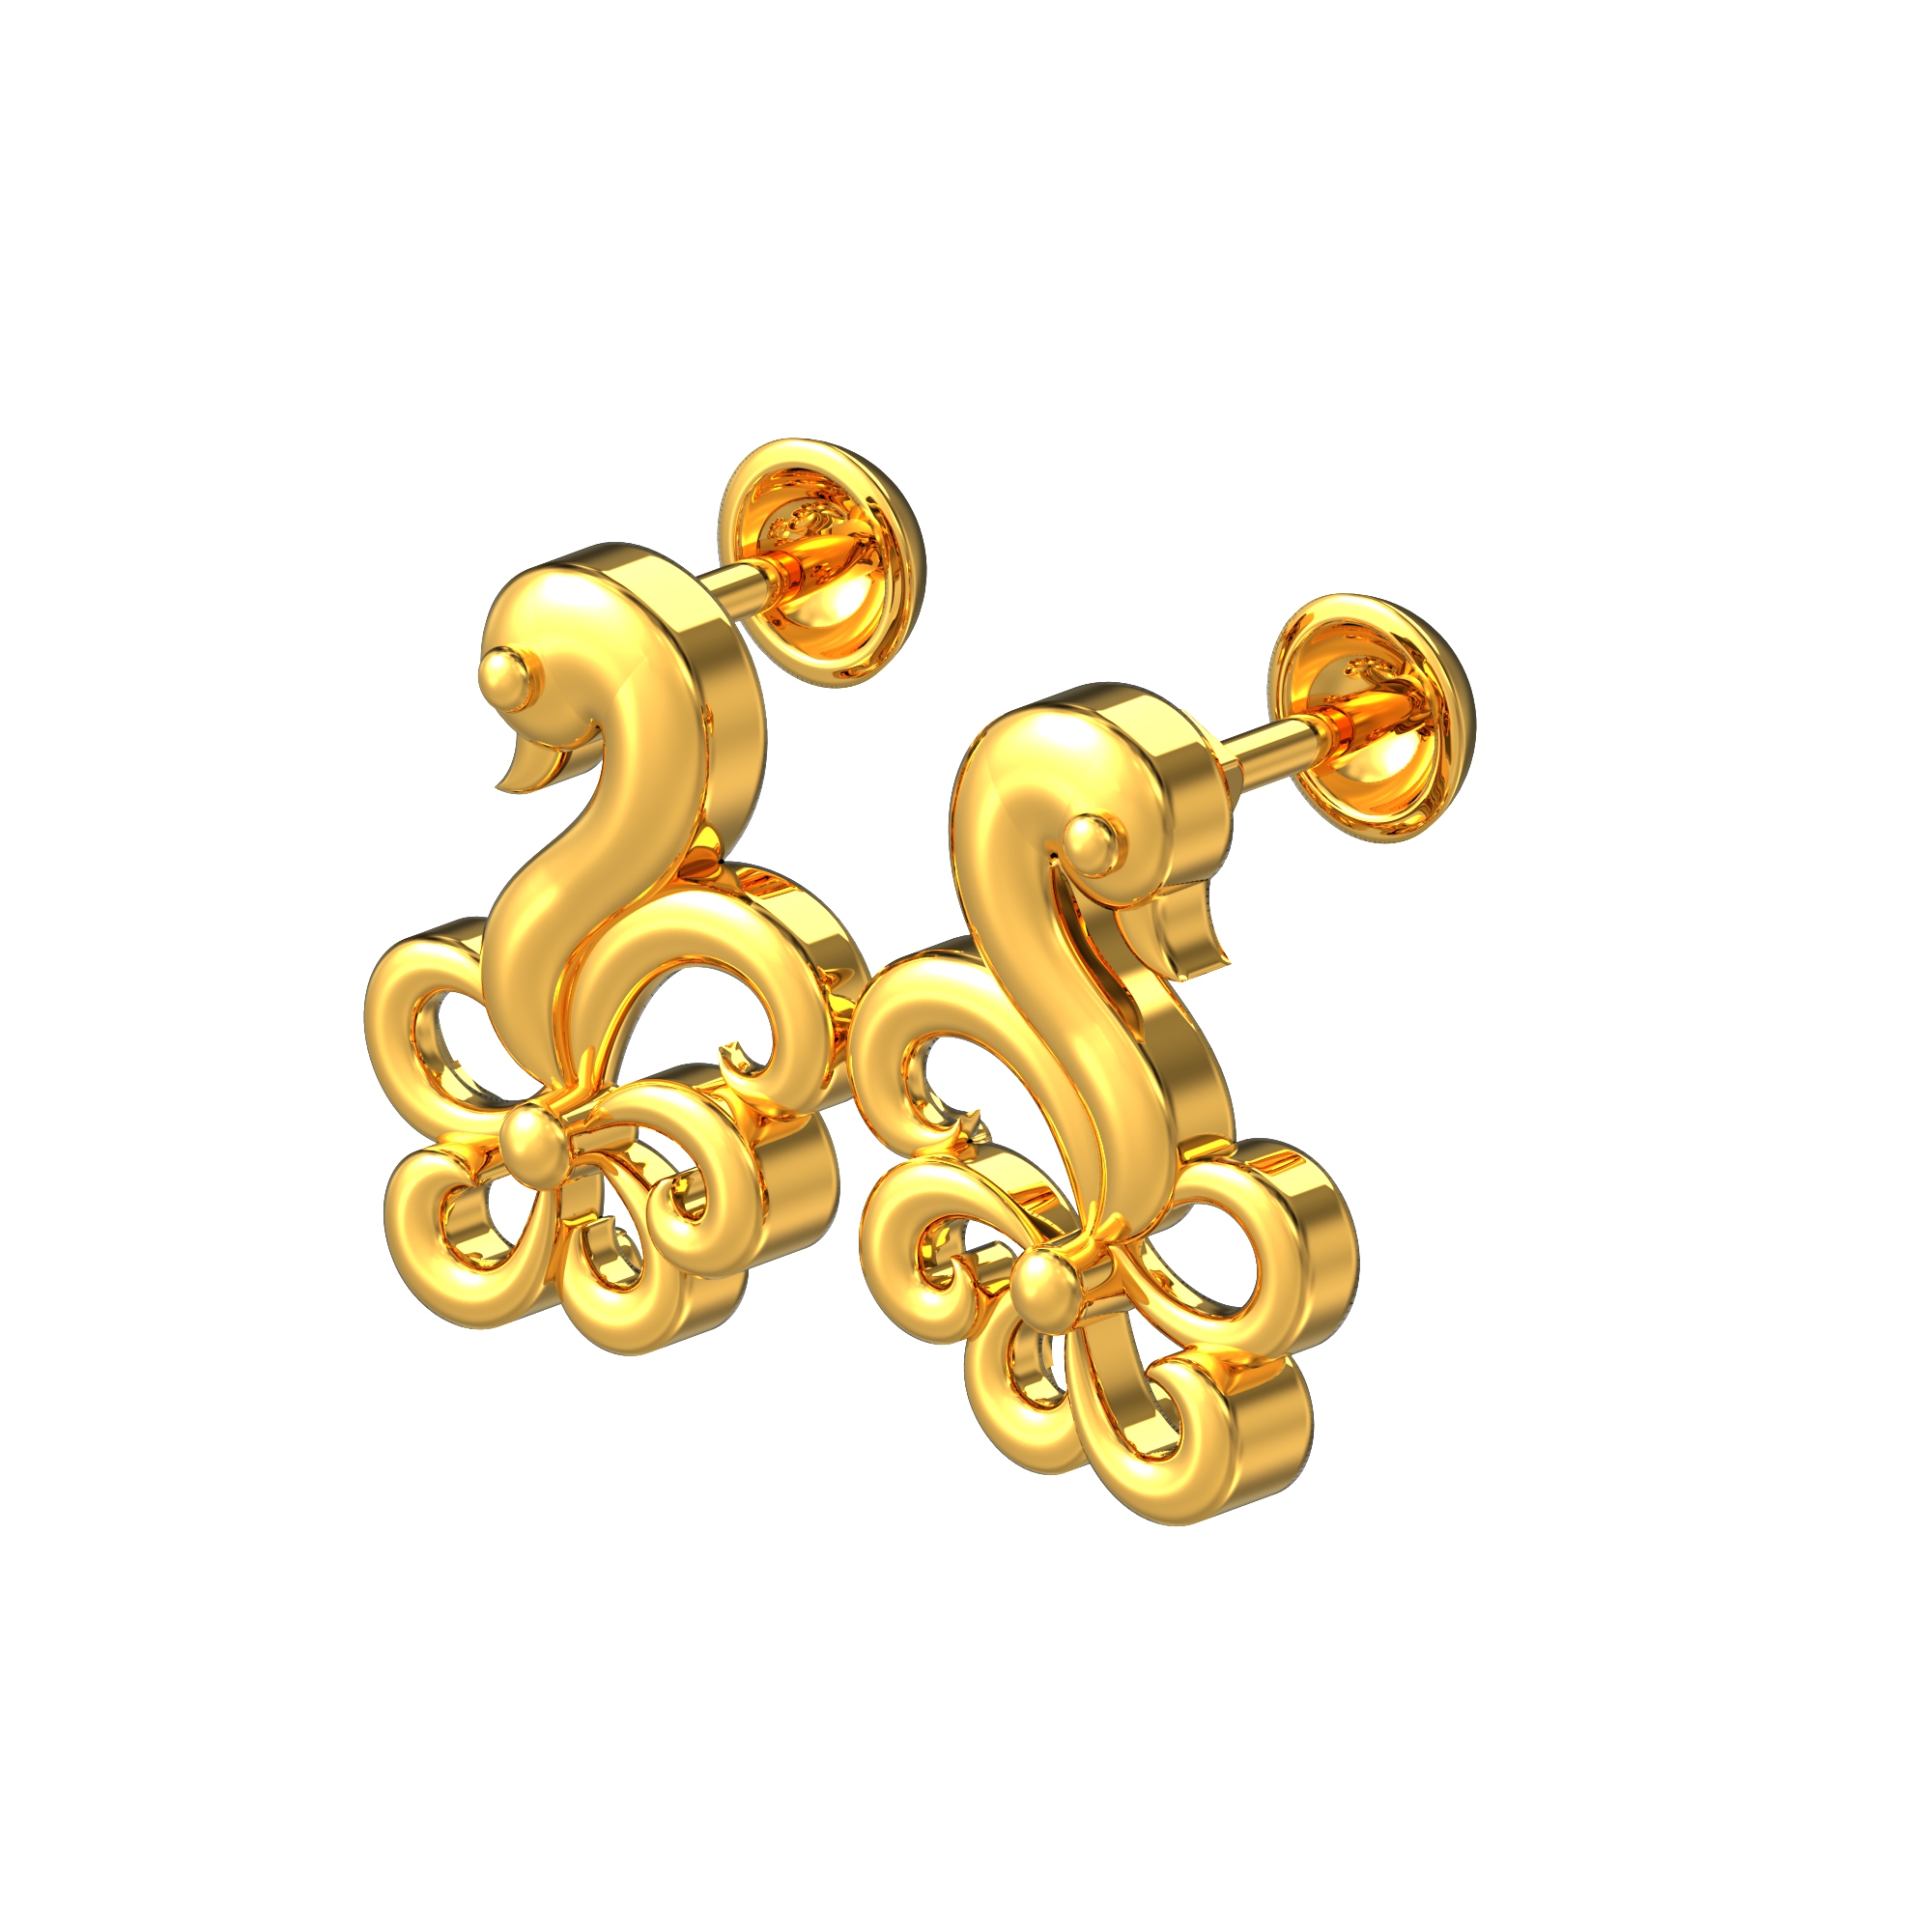 Wholesale gold jewellery manufacturers Near me